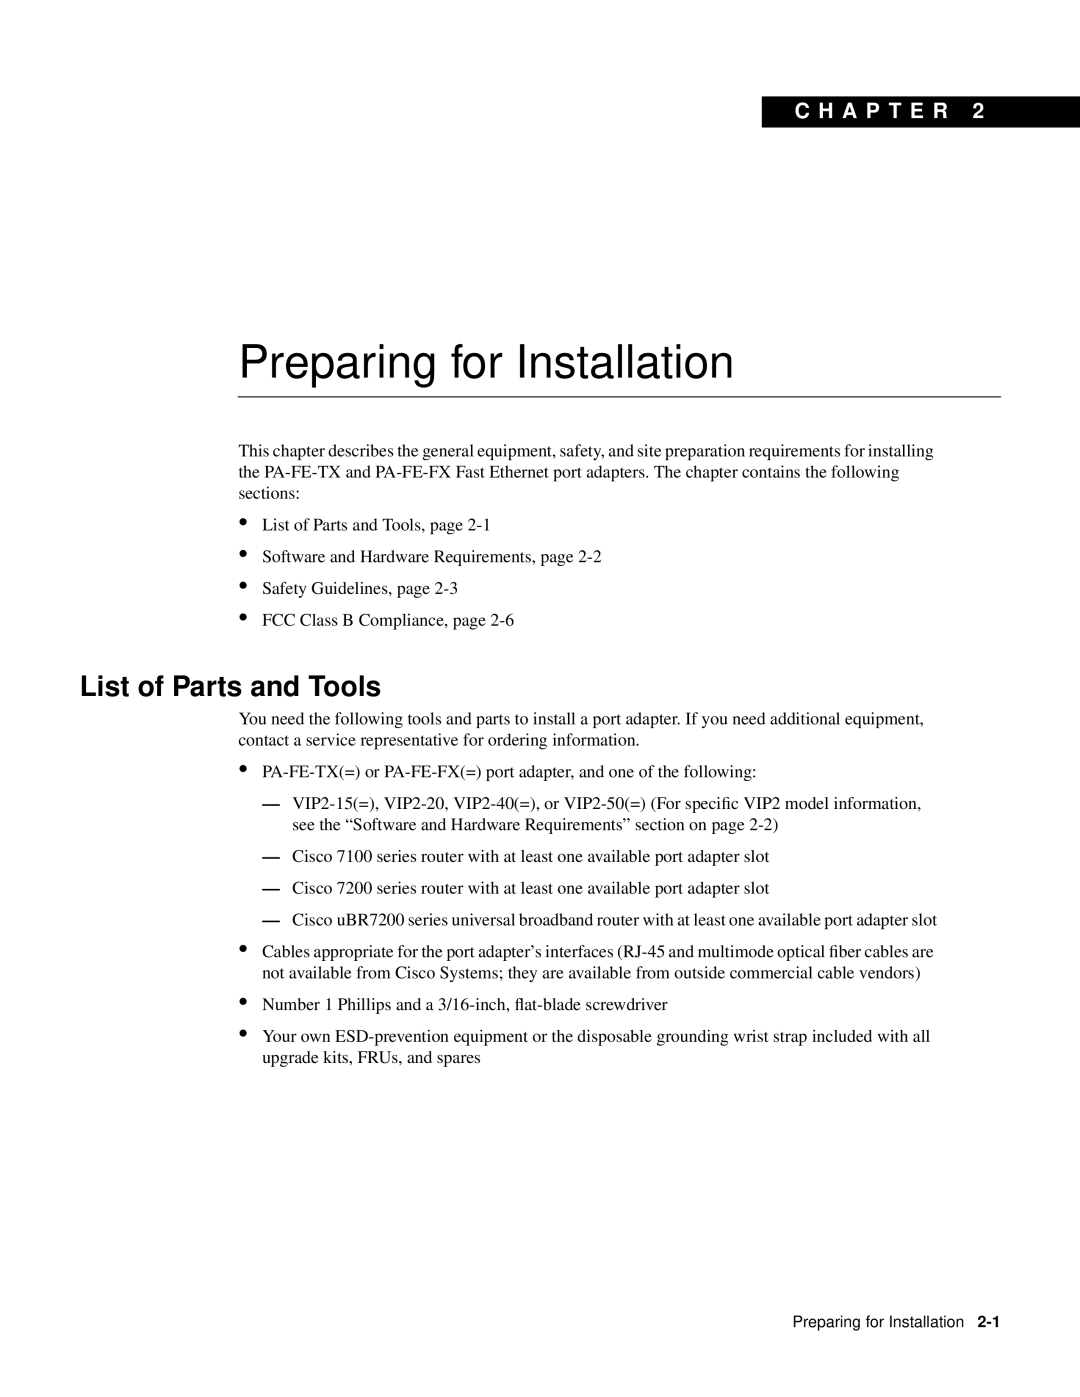 Cisco Systems PA-FE-FX, PA-FE-TX manual Preparing for Installation, List of Parts and Tools, C H A P T E R 